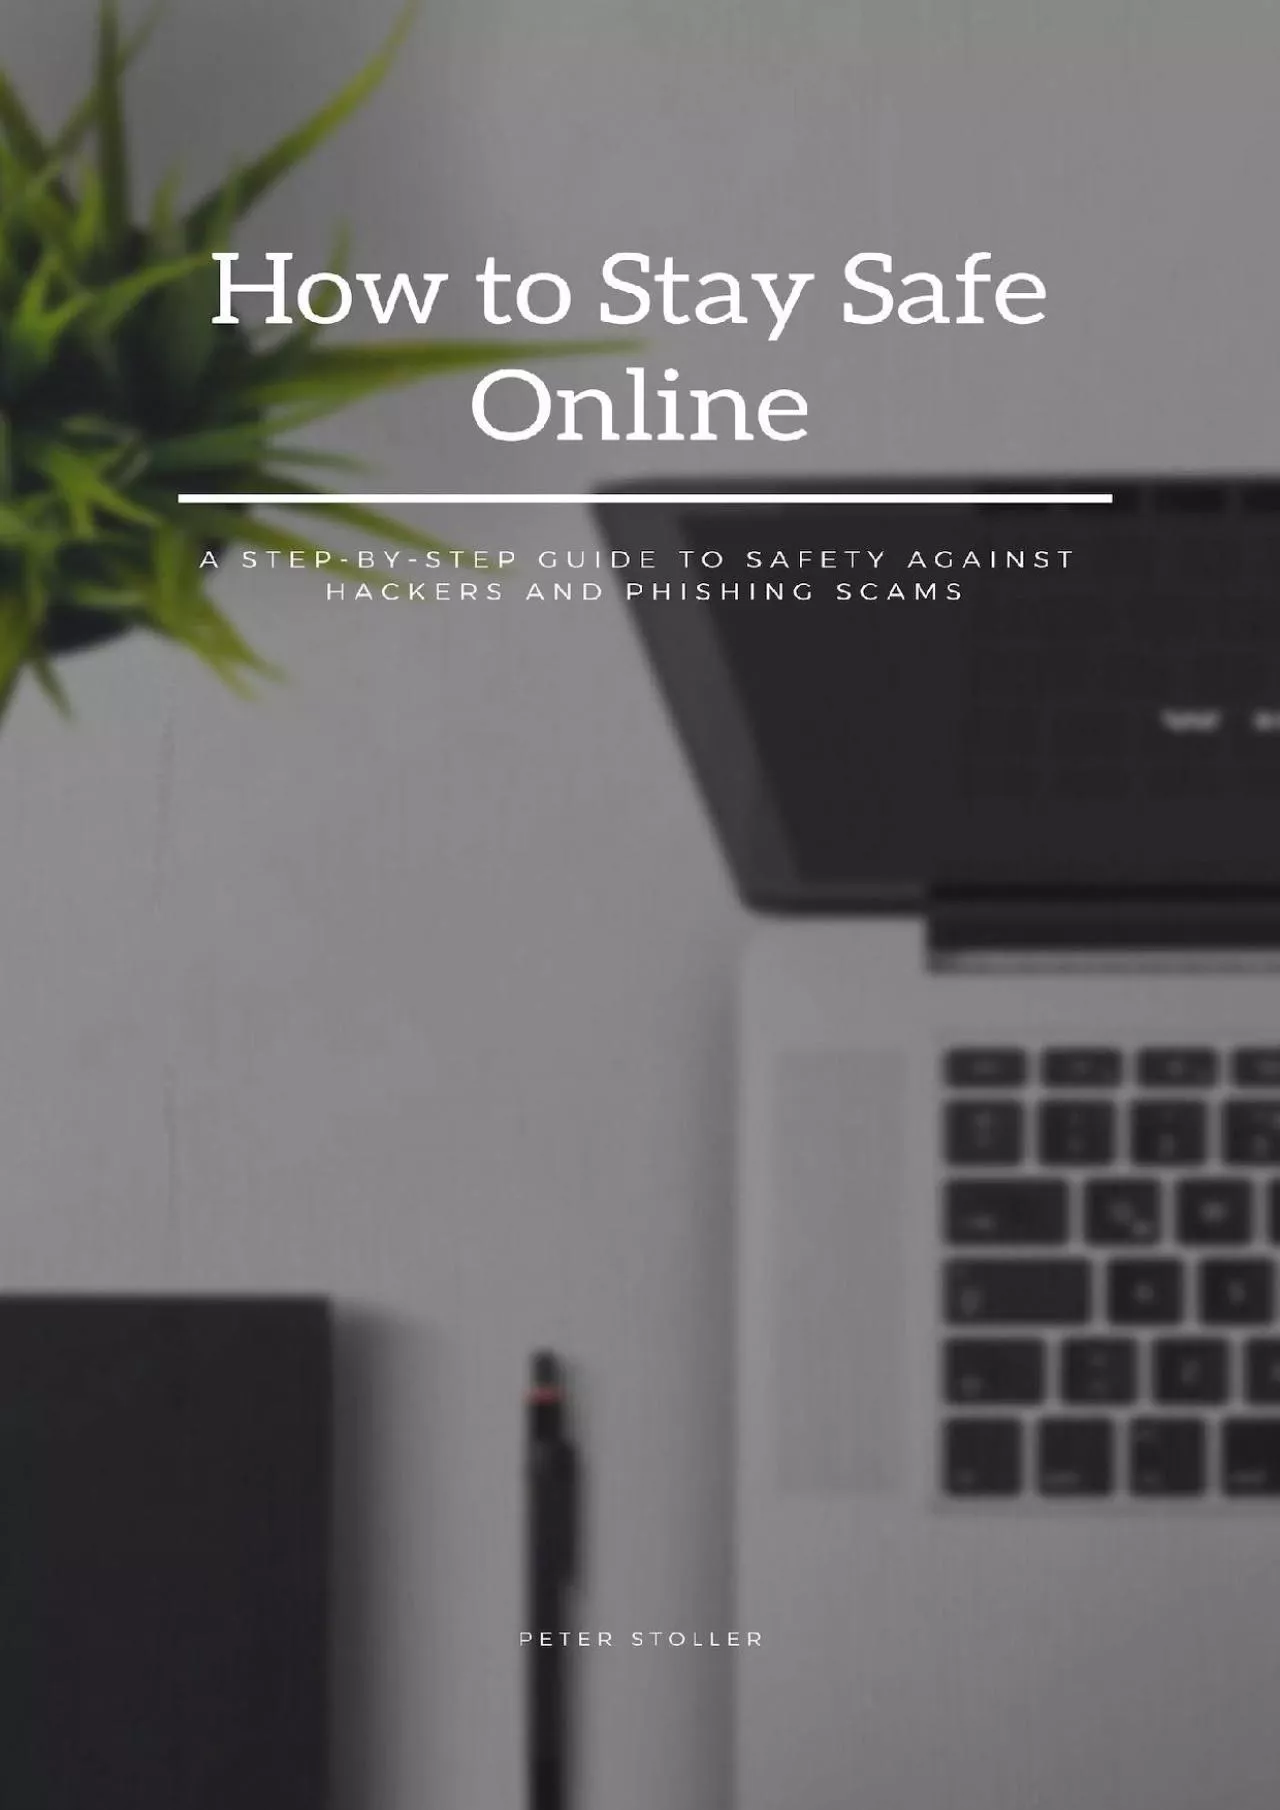 [DOWLOAD]-How to Stay Safe Online: A Step-by-Step Guide to Safety Against Hackers and